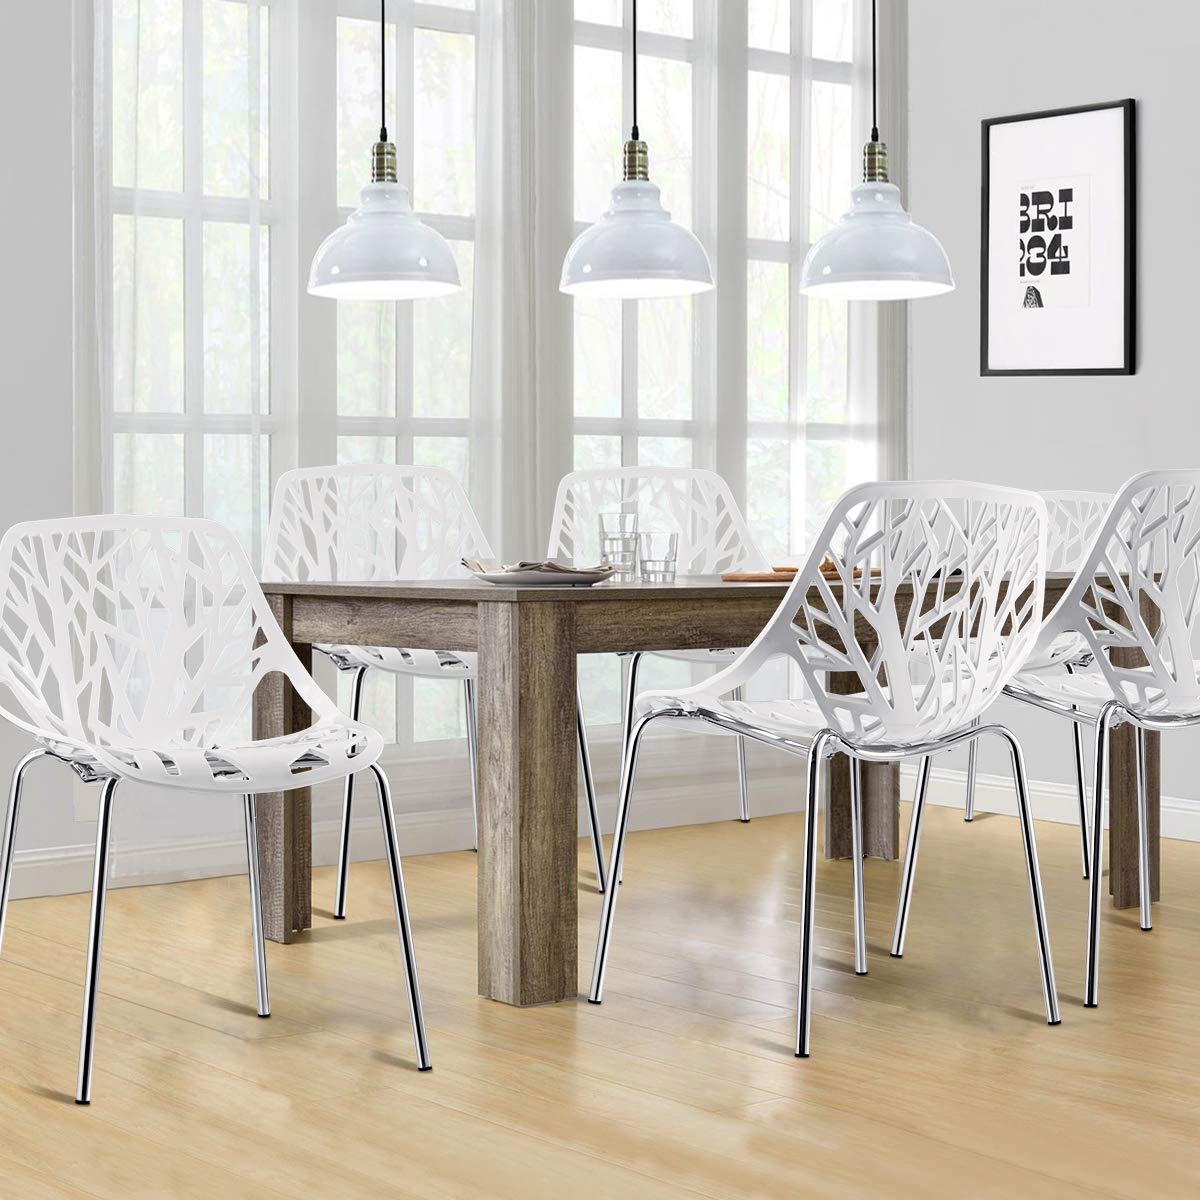 Giantex Set of 6 Modern Dining Chair Birds Nest Modern Stackable Plastic Hollow-Out Geometric Style